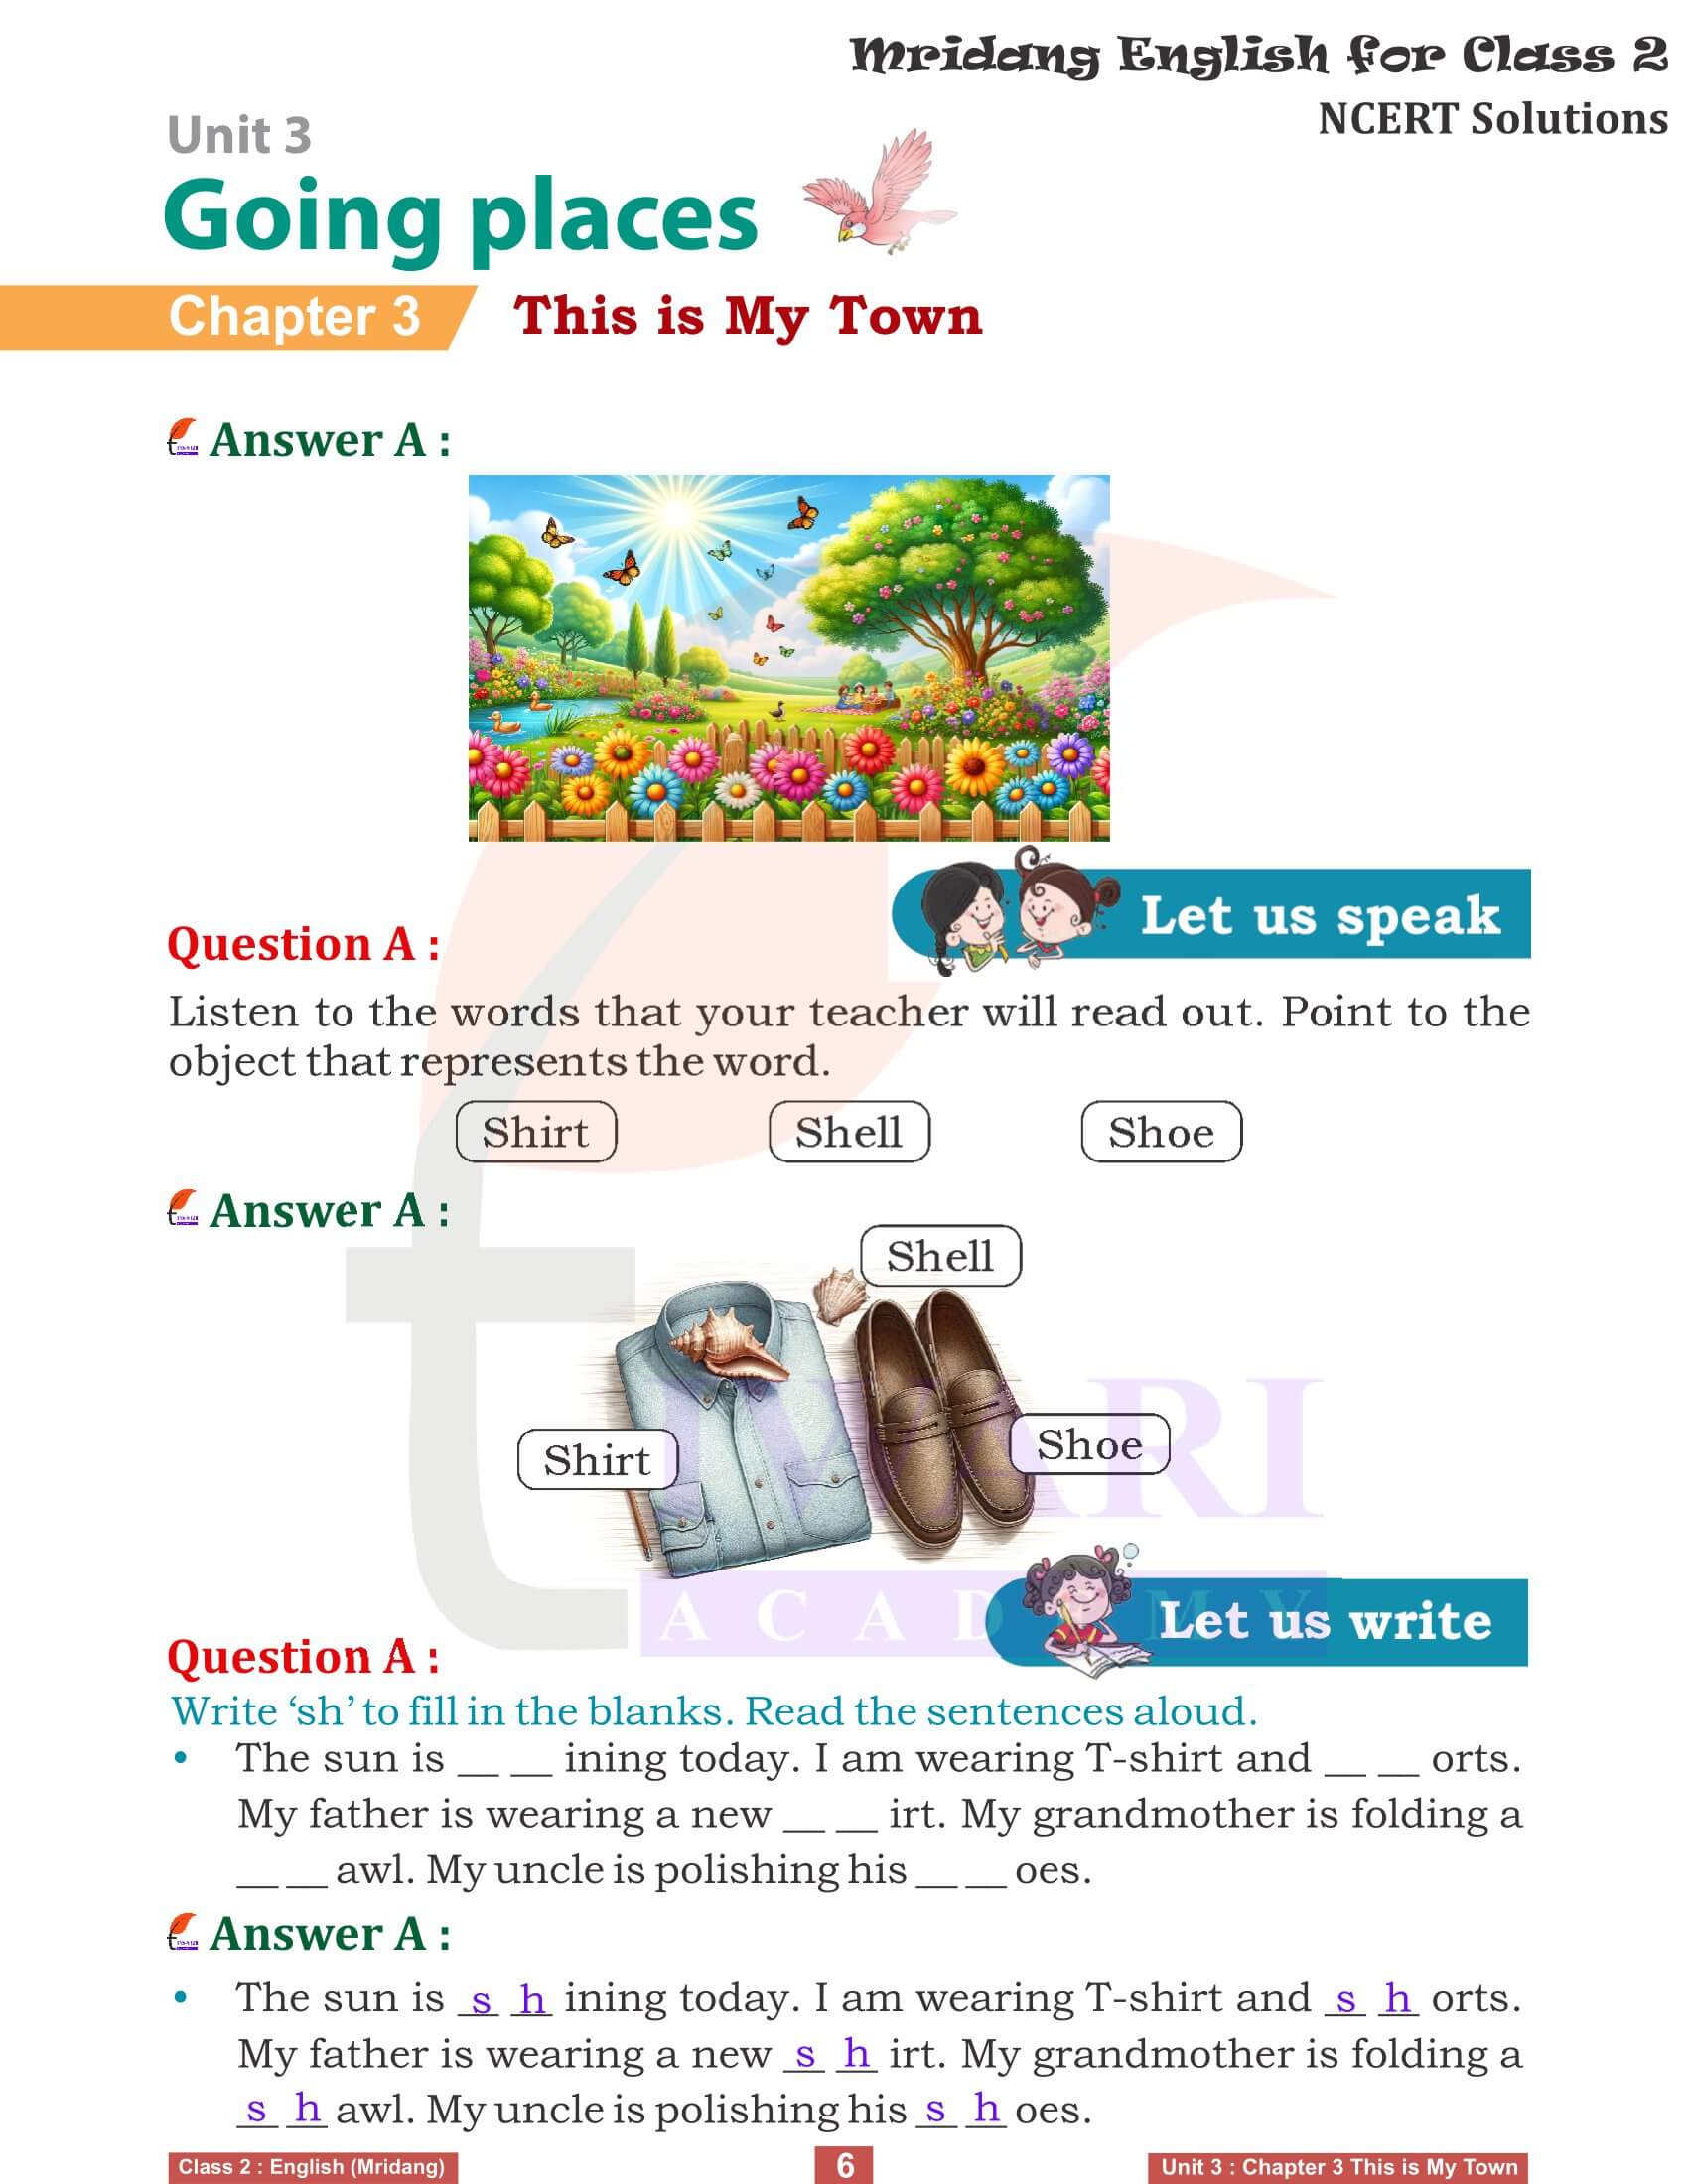 Class 2 English Mridang Unit 3 Going Places Chapter 3 Solutions